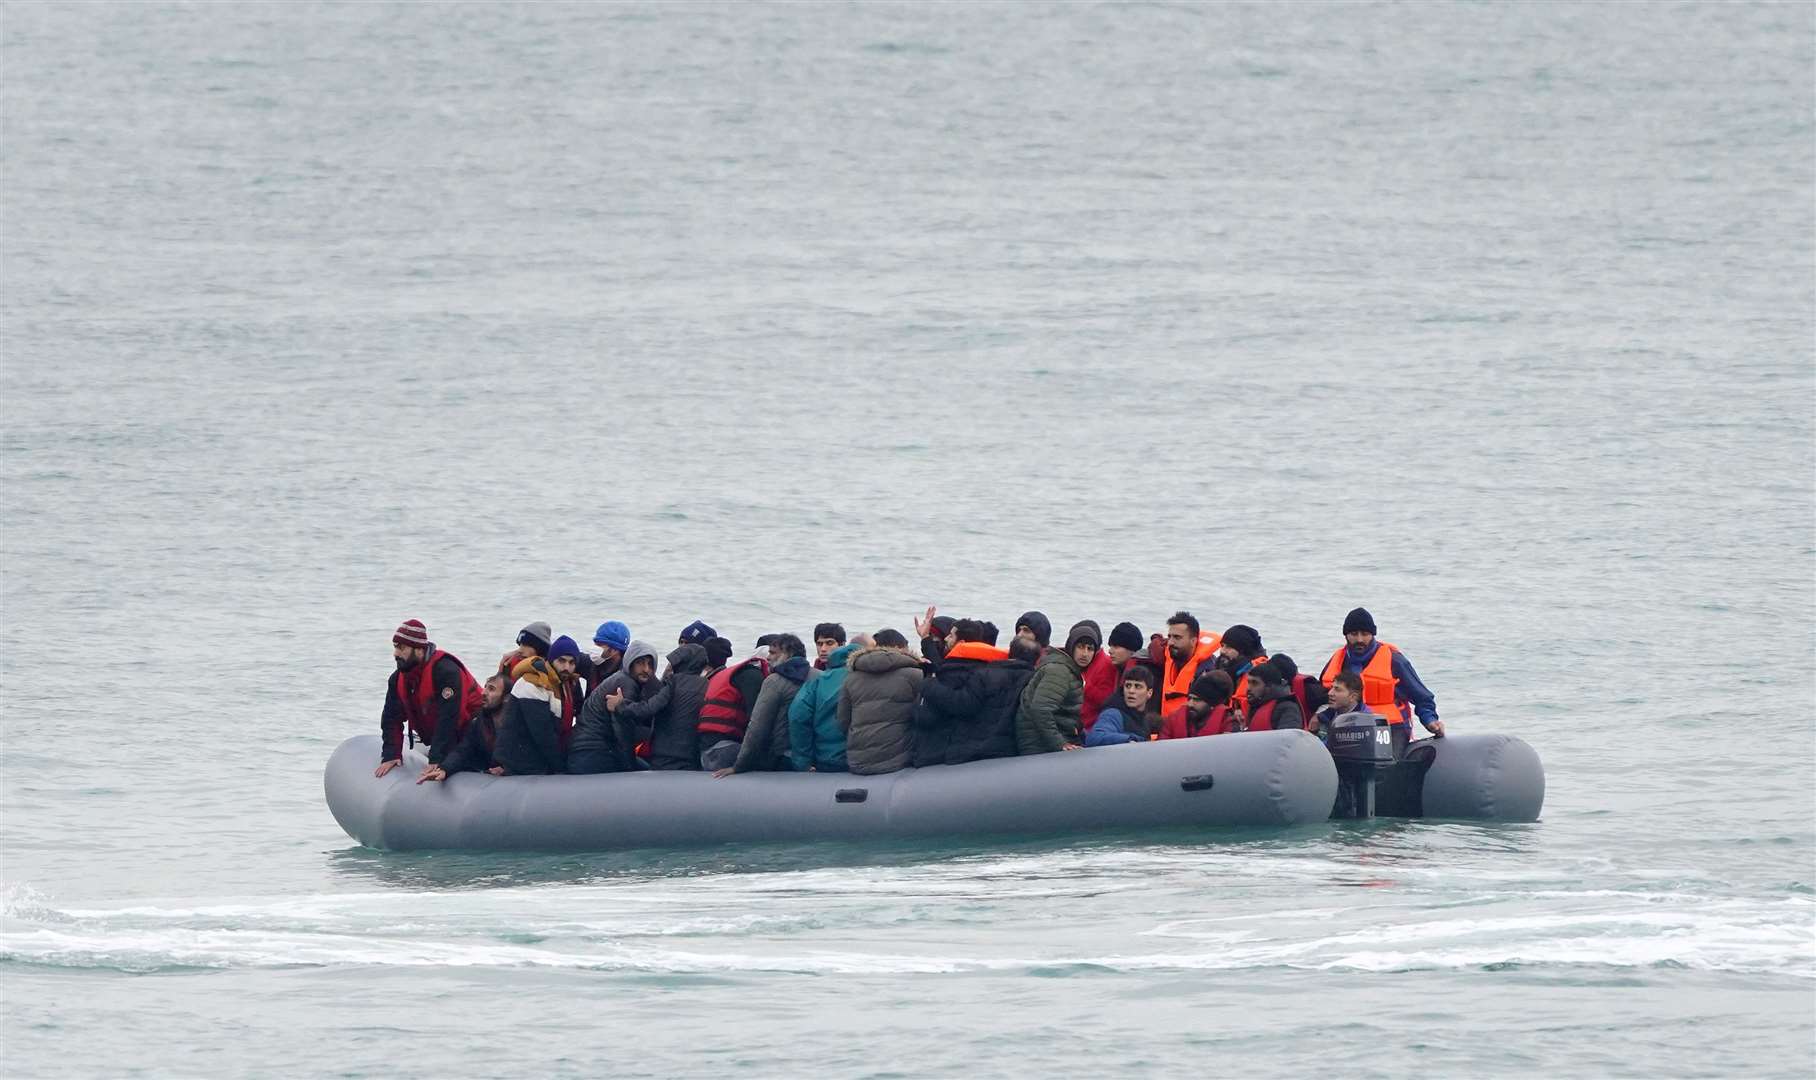 A group of people adrift in a dinghy before being rescued off the coast of Folkestone, Kent (Gareth Fuller/PA)